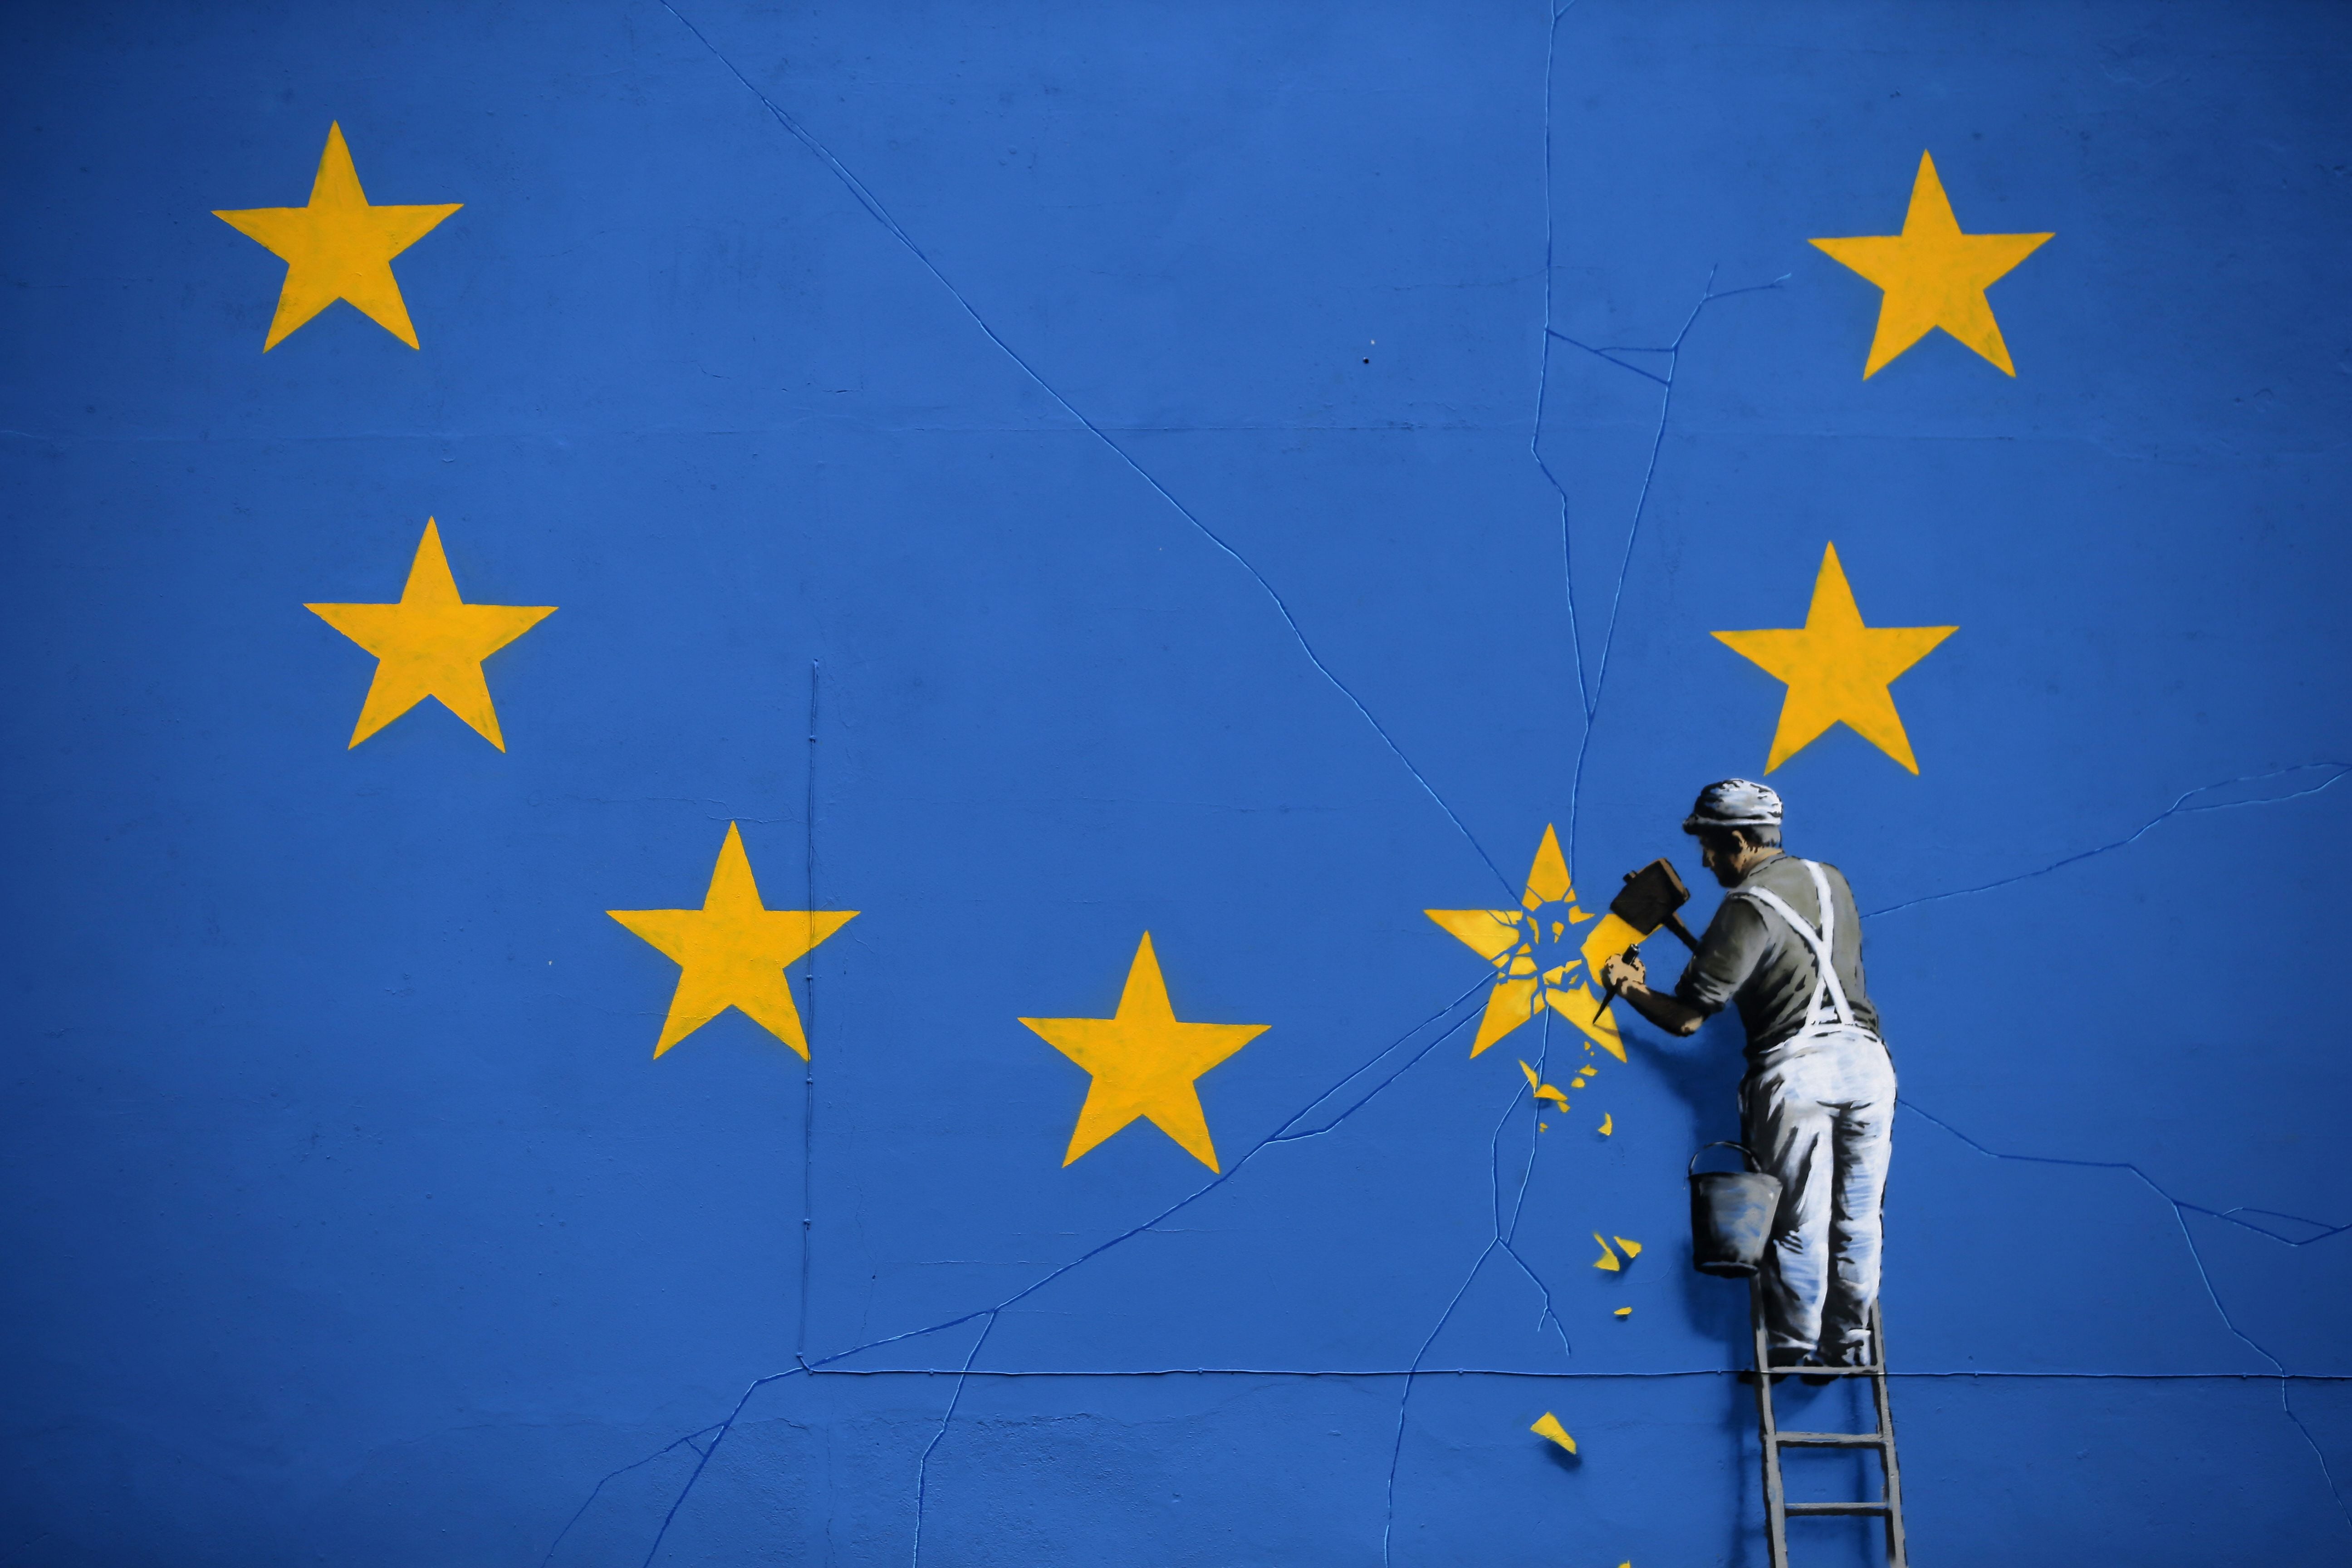 To catch a falling star: Graffiti artist Banksy’s Brexit-themed mural in Dover